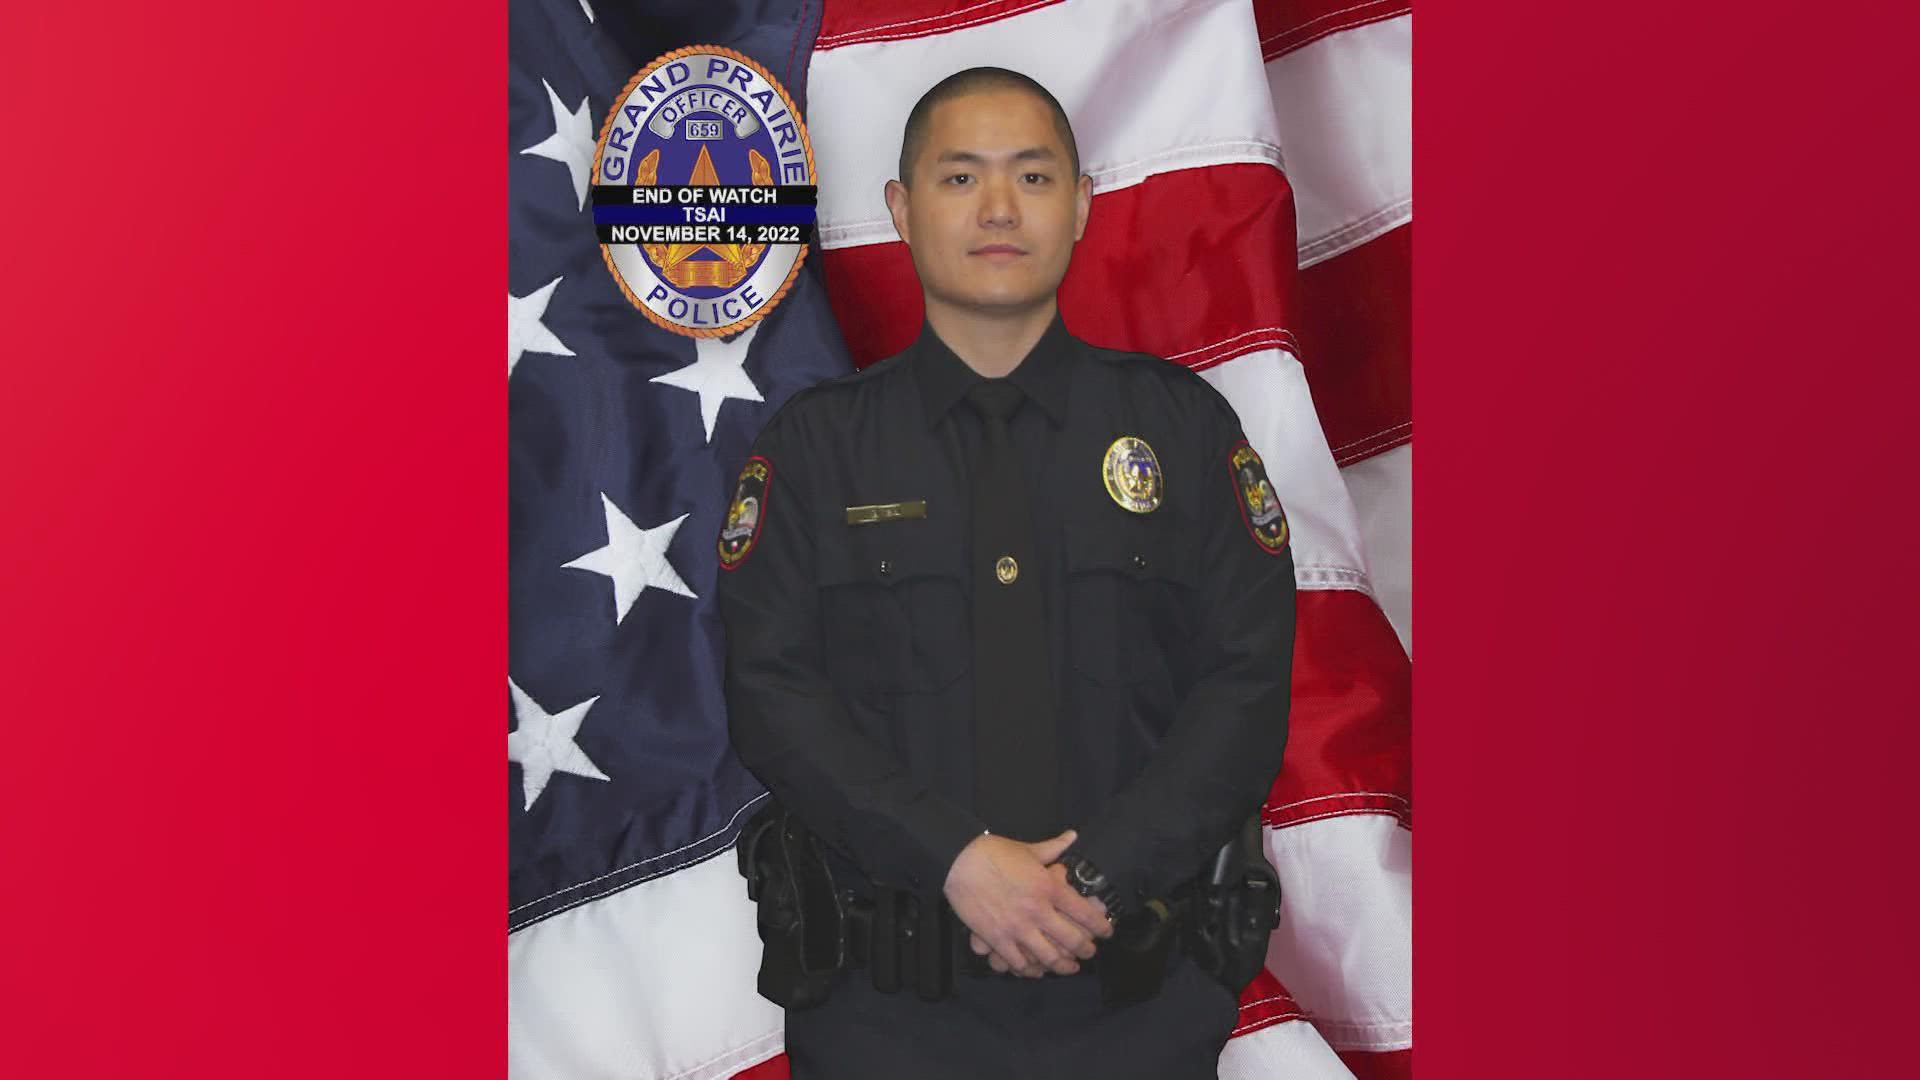 The Grand Prairie Police Department said officer Brandon Paul Tsai passed away after being involved in a traffic collision.